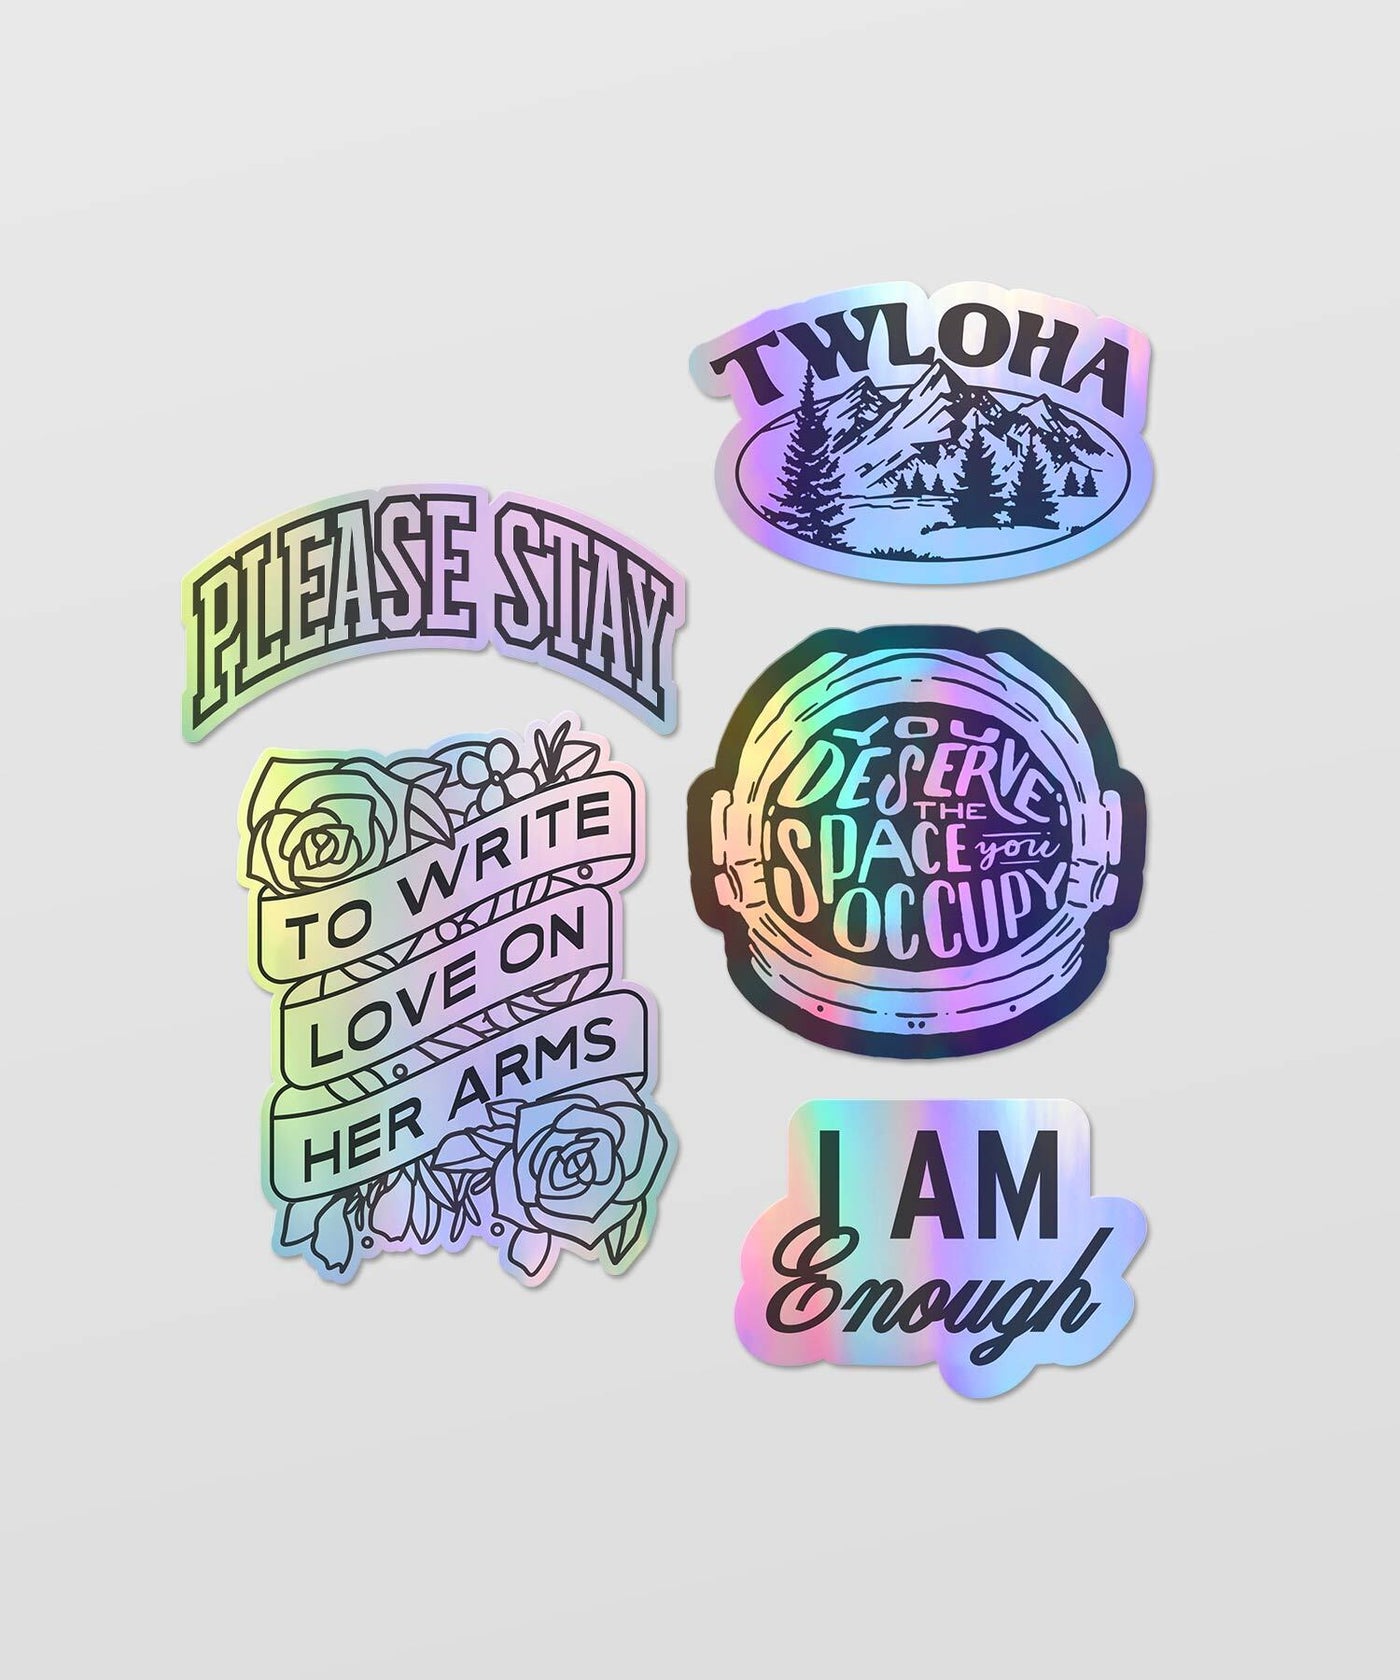 Space Holographic Sticker Pack